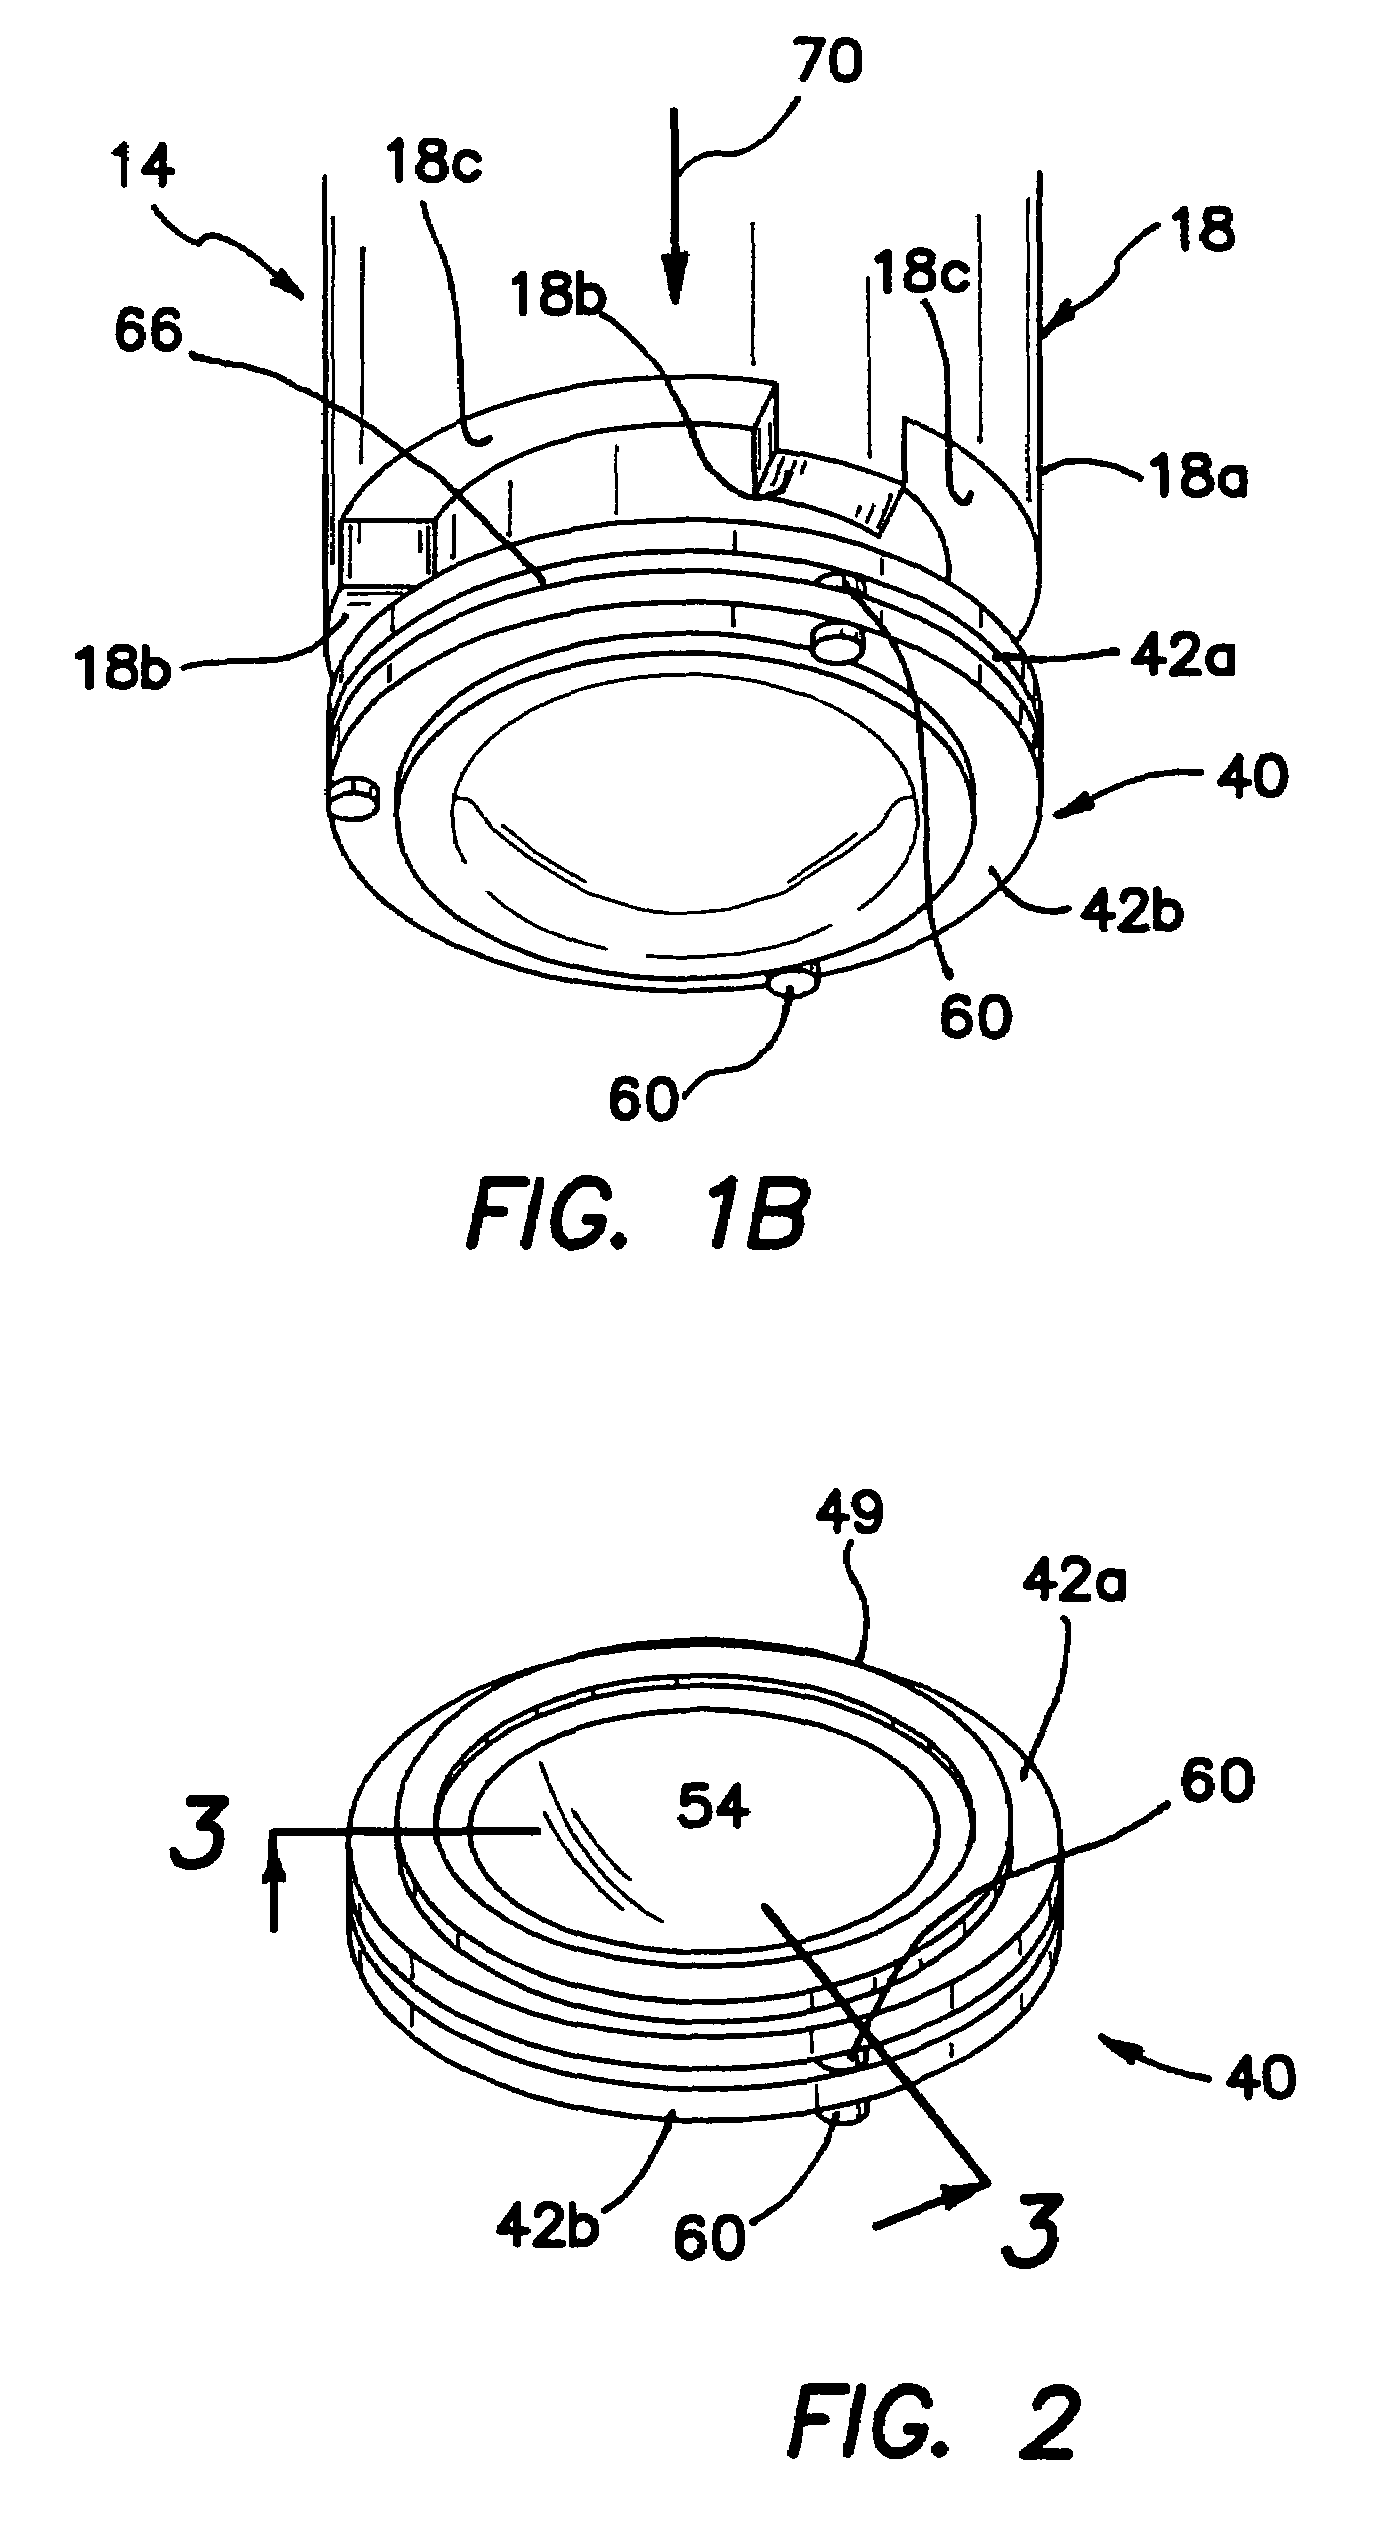 Contact lens mold assemblies and systems and methods of producing same